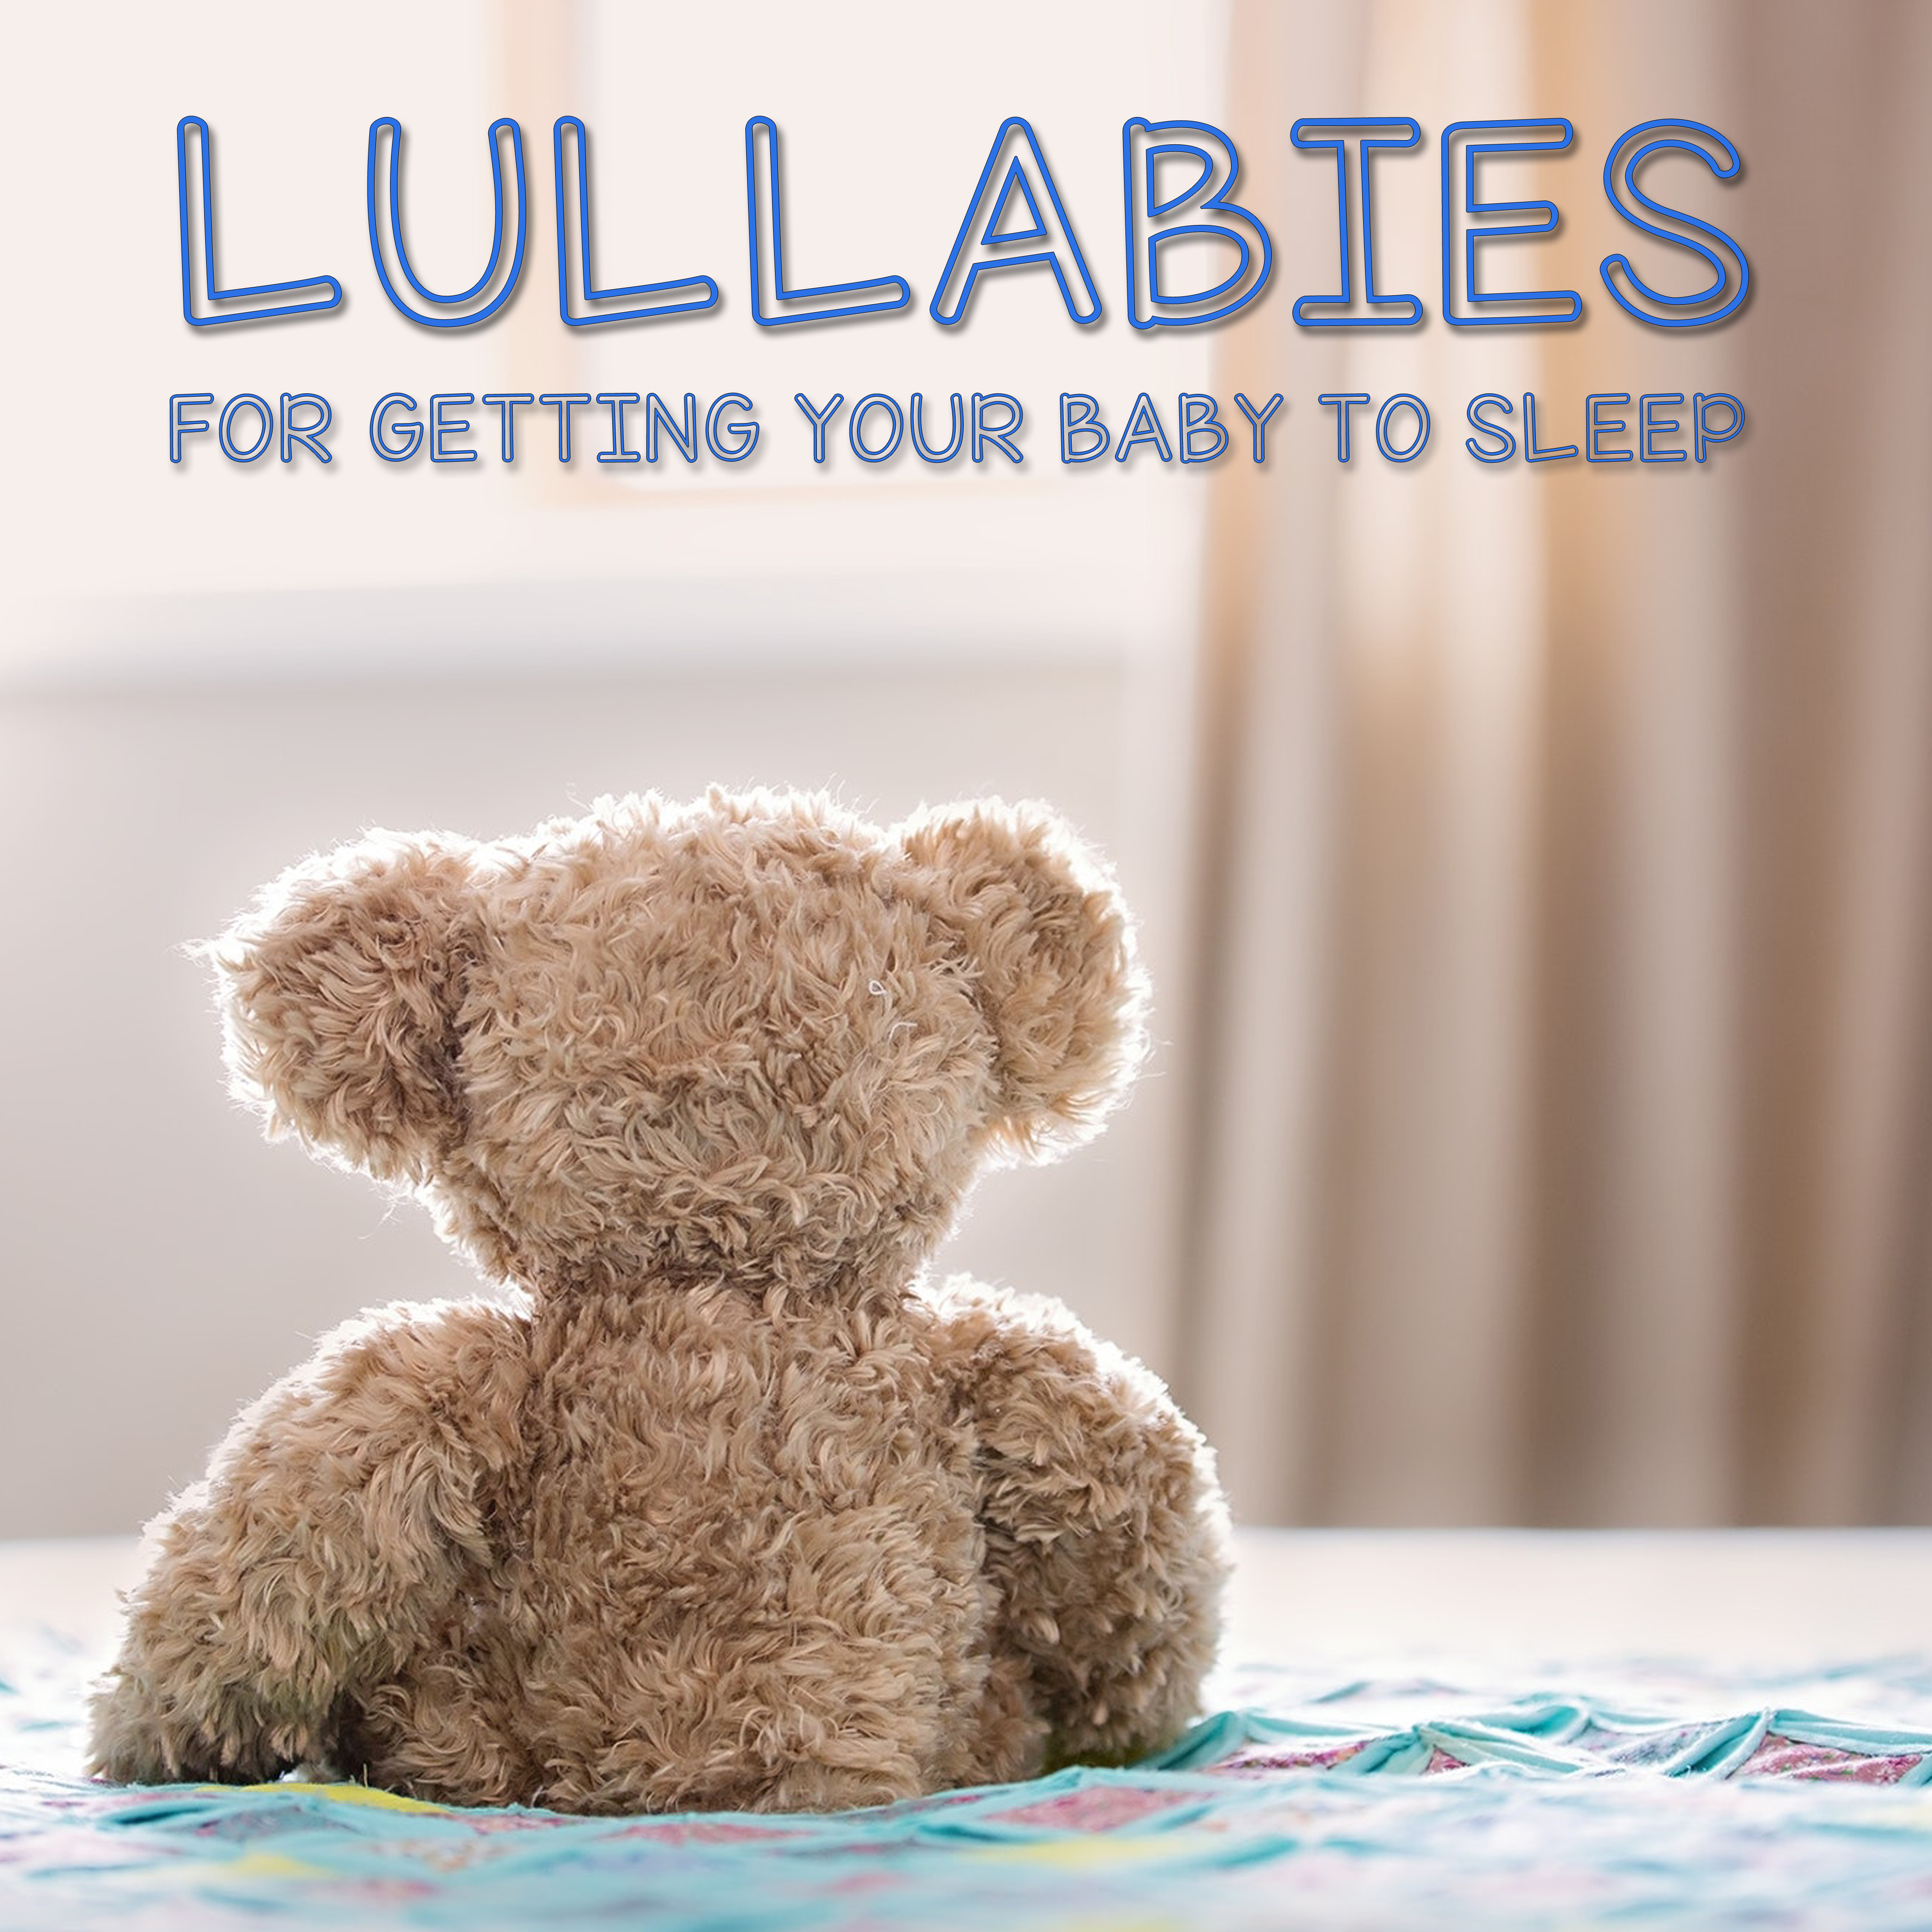 14 Lullabies for Getting Your Baby to Sleep